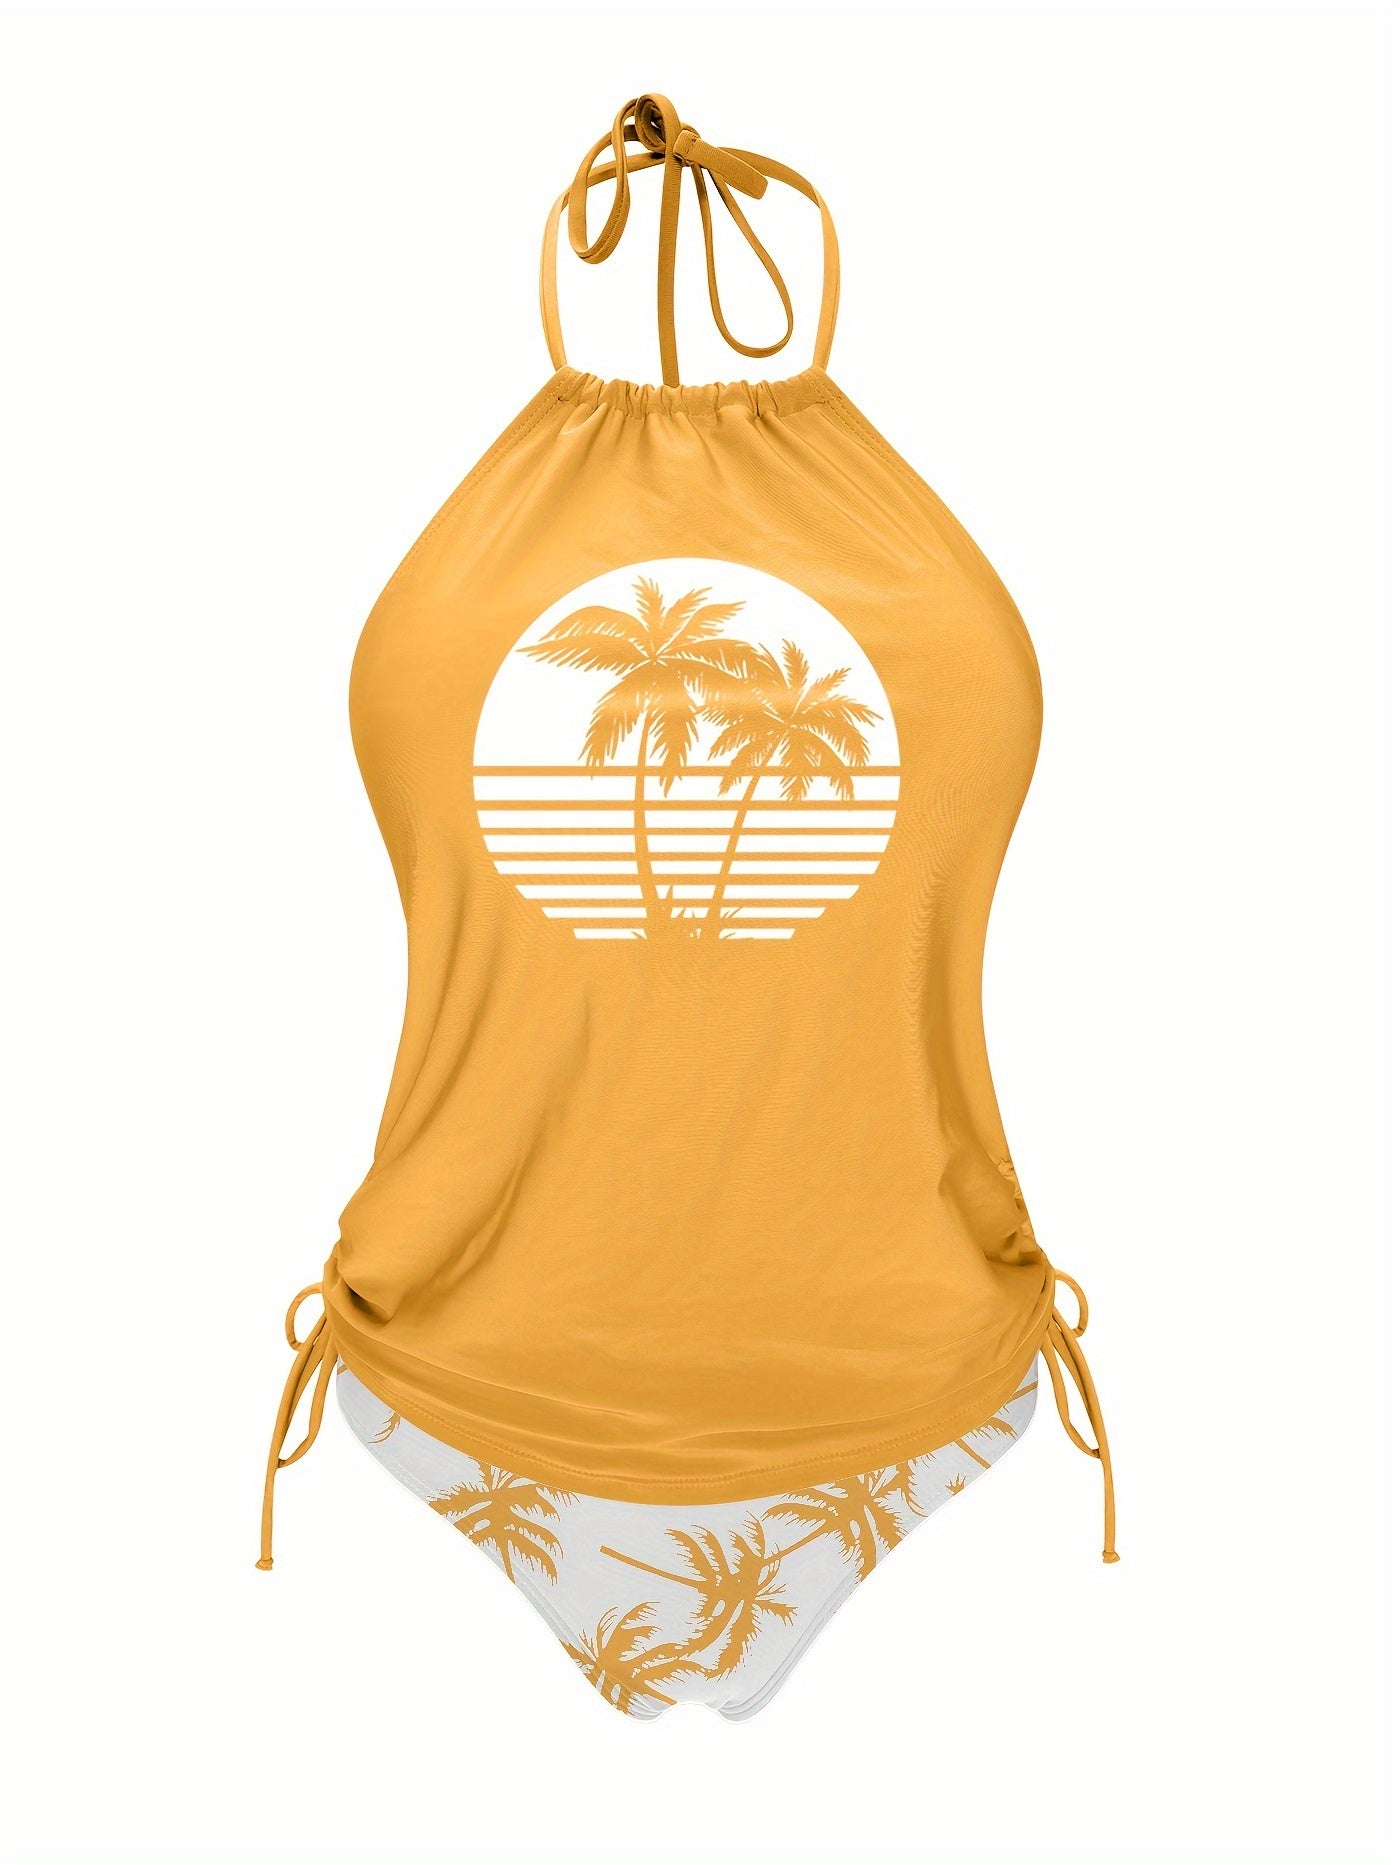 Coconut Tree Sunset Pattern Drawstring 2 Piece Set Swimsuit, Halter Tie Neck Backless Stretchy Low Waist Bathing Suit For Beach Pool, Women's Swimwear & Clothing